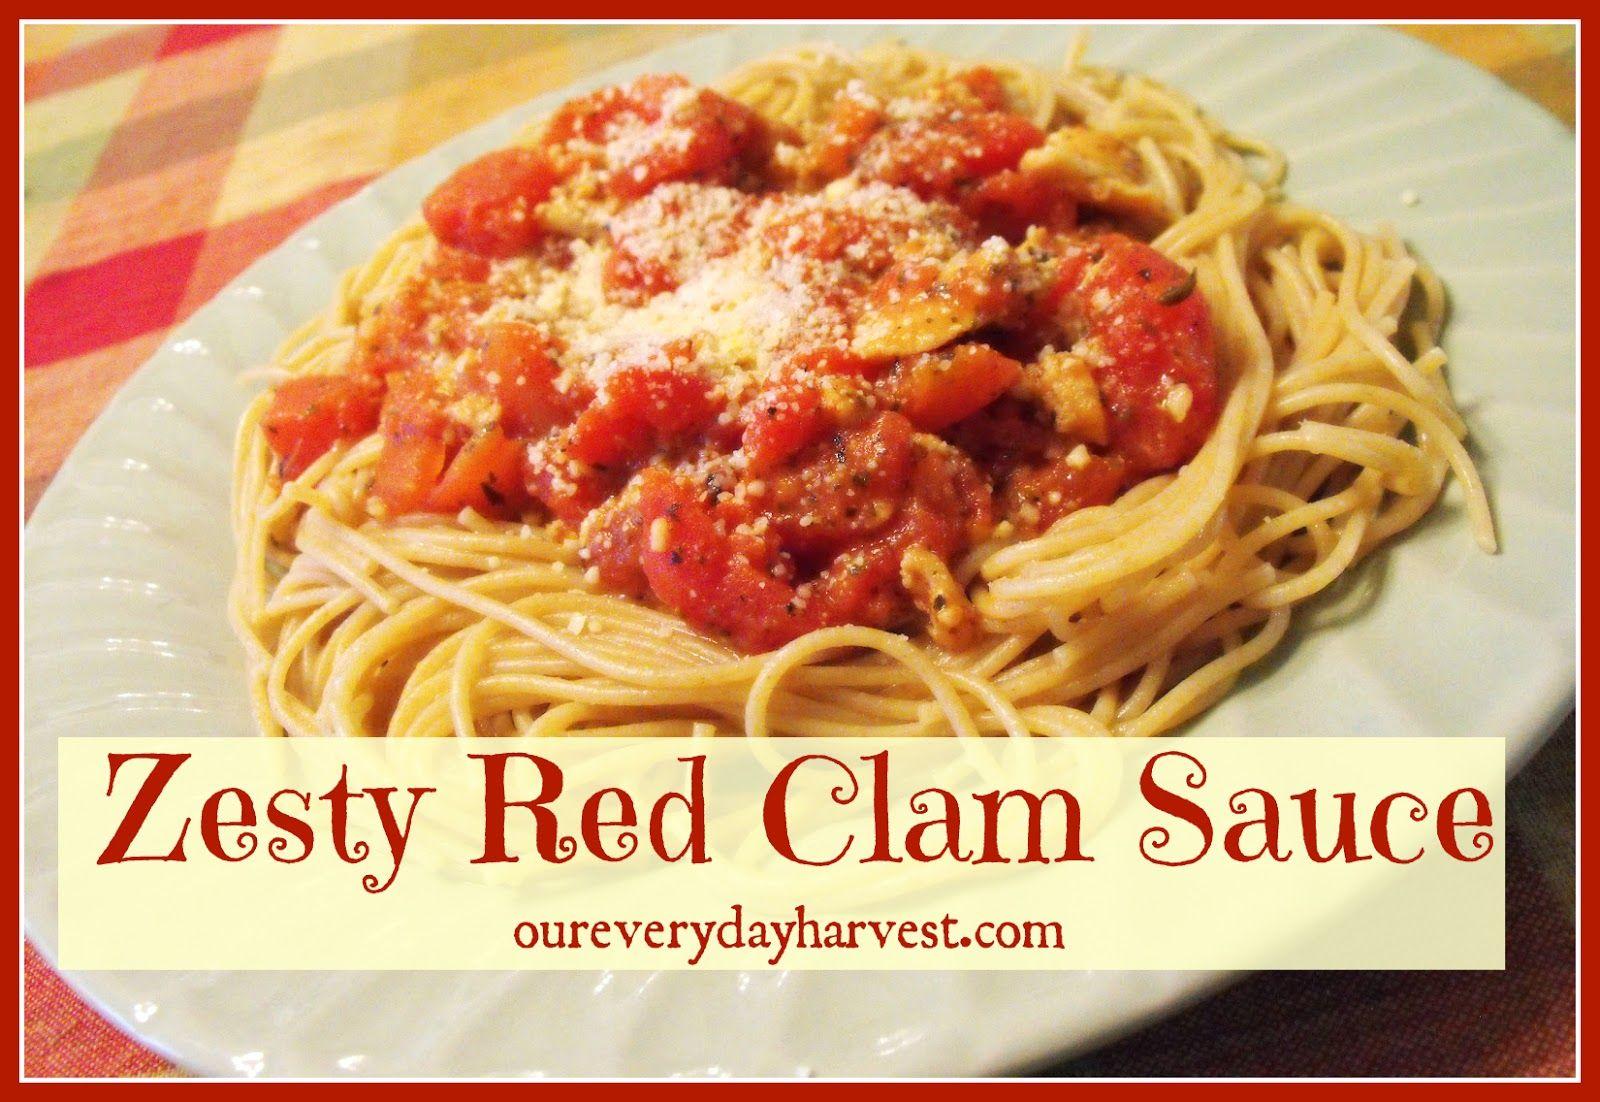 Yellow and Red Clam Logo - Zesty Red Clam Sauce | Our Everyday Harvest